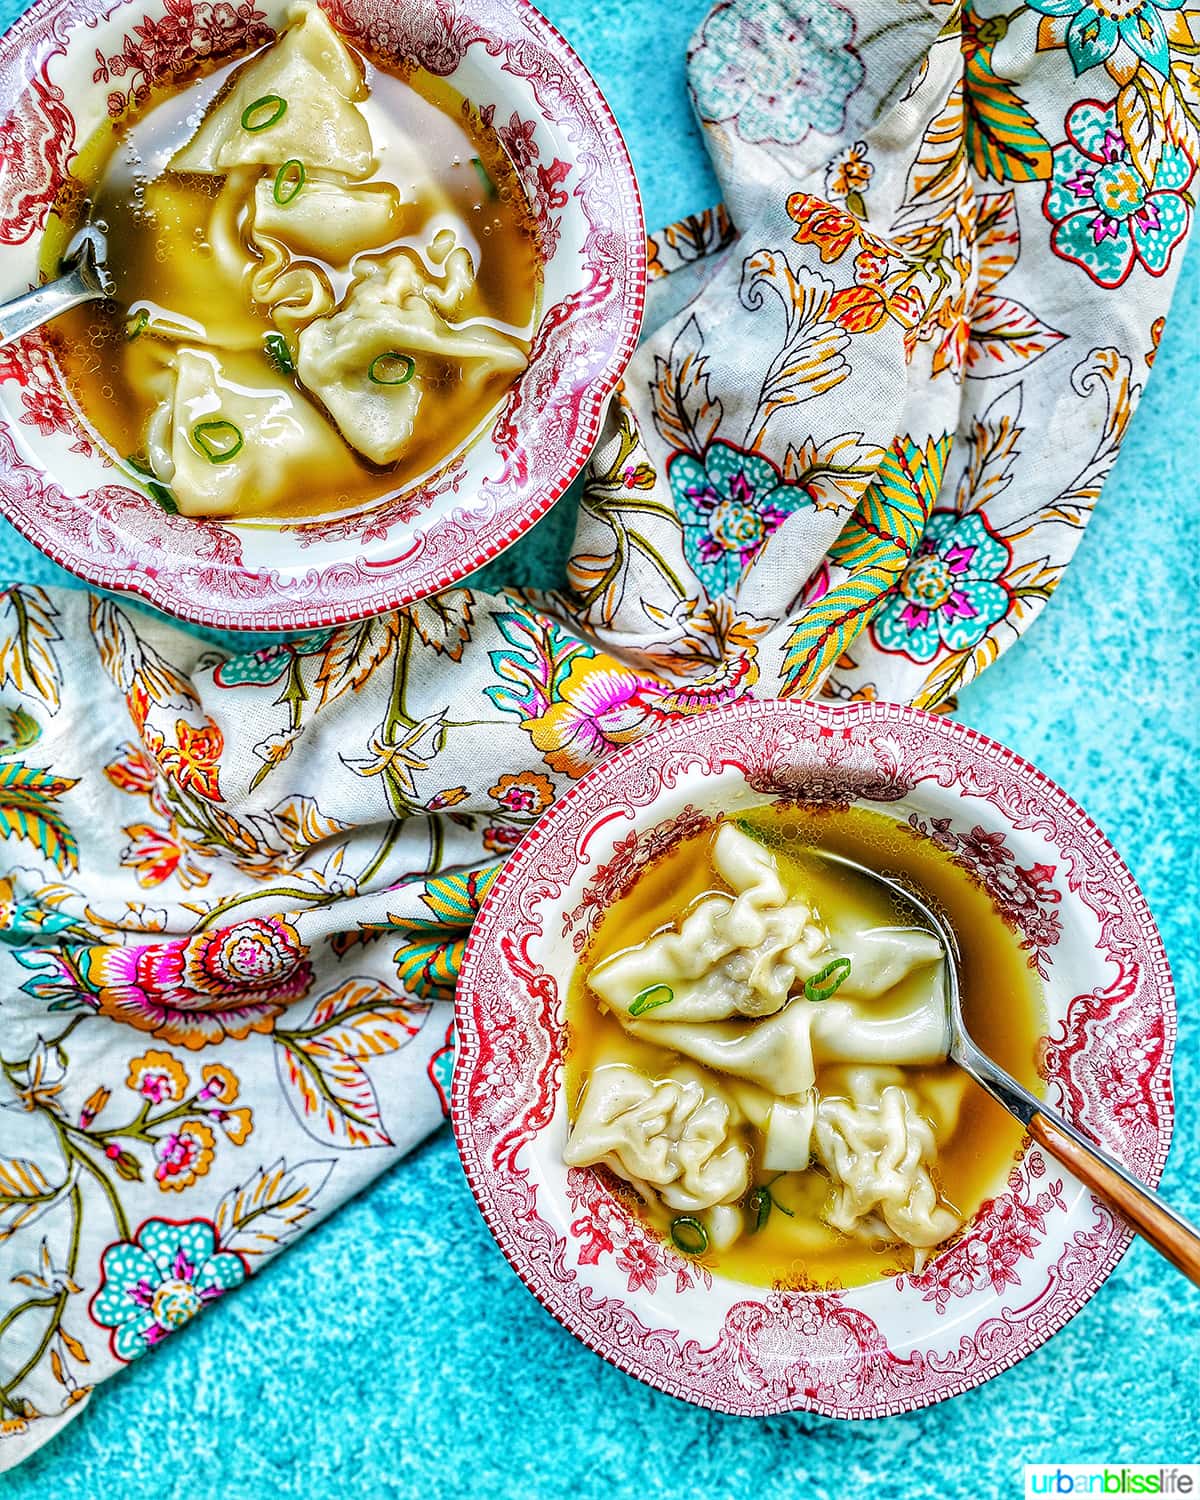 two bowls of wonton noodle soup with spoon, colorful napkin, and blue background